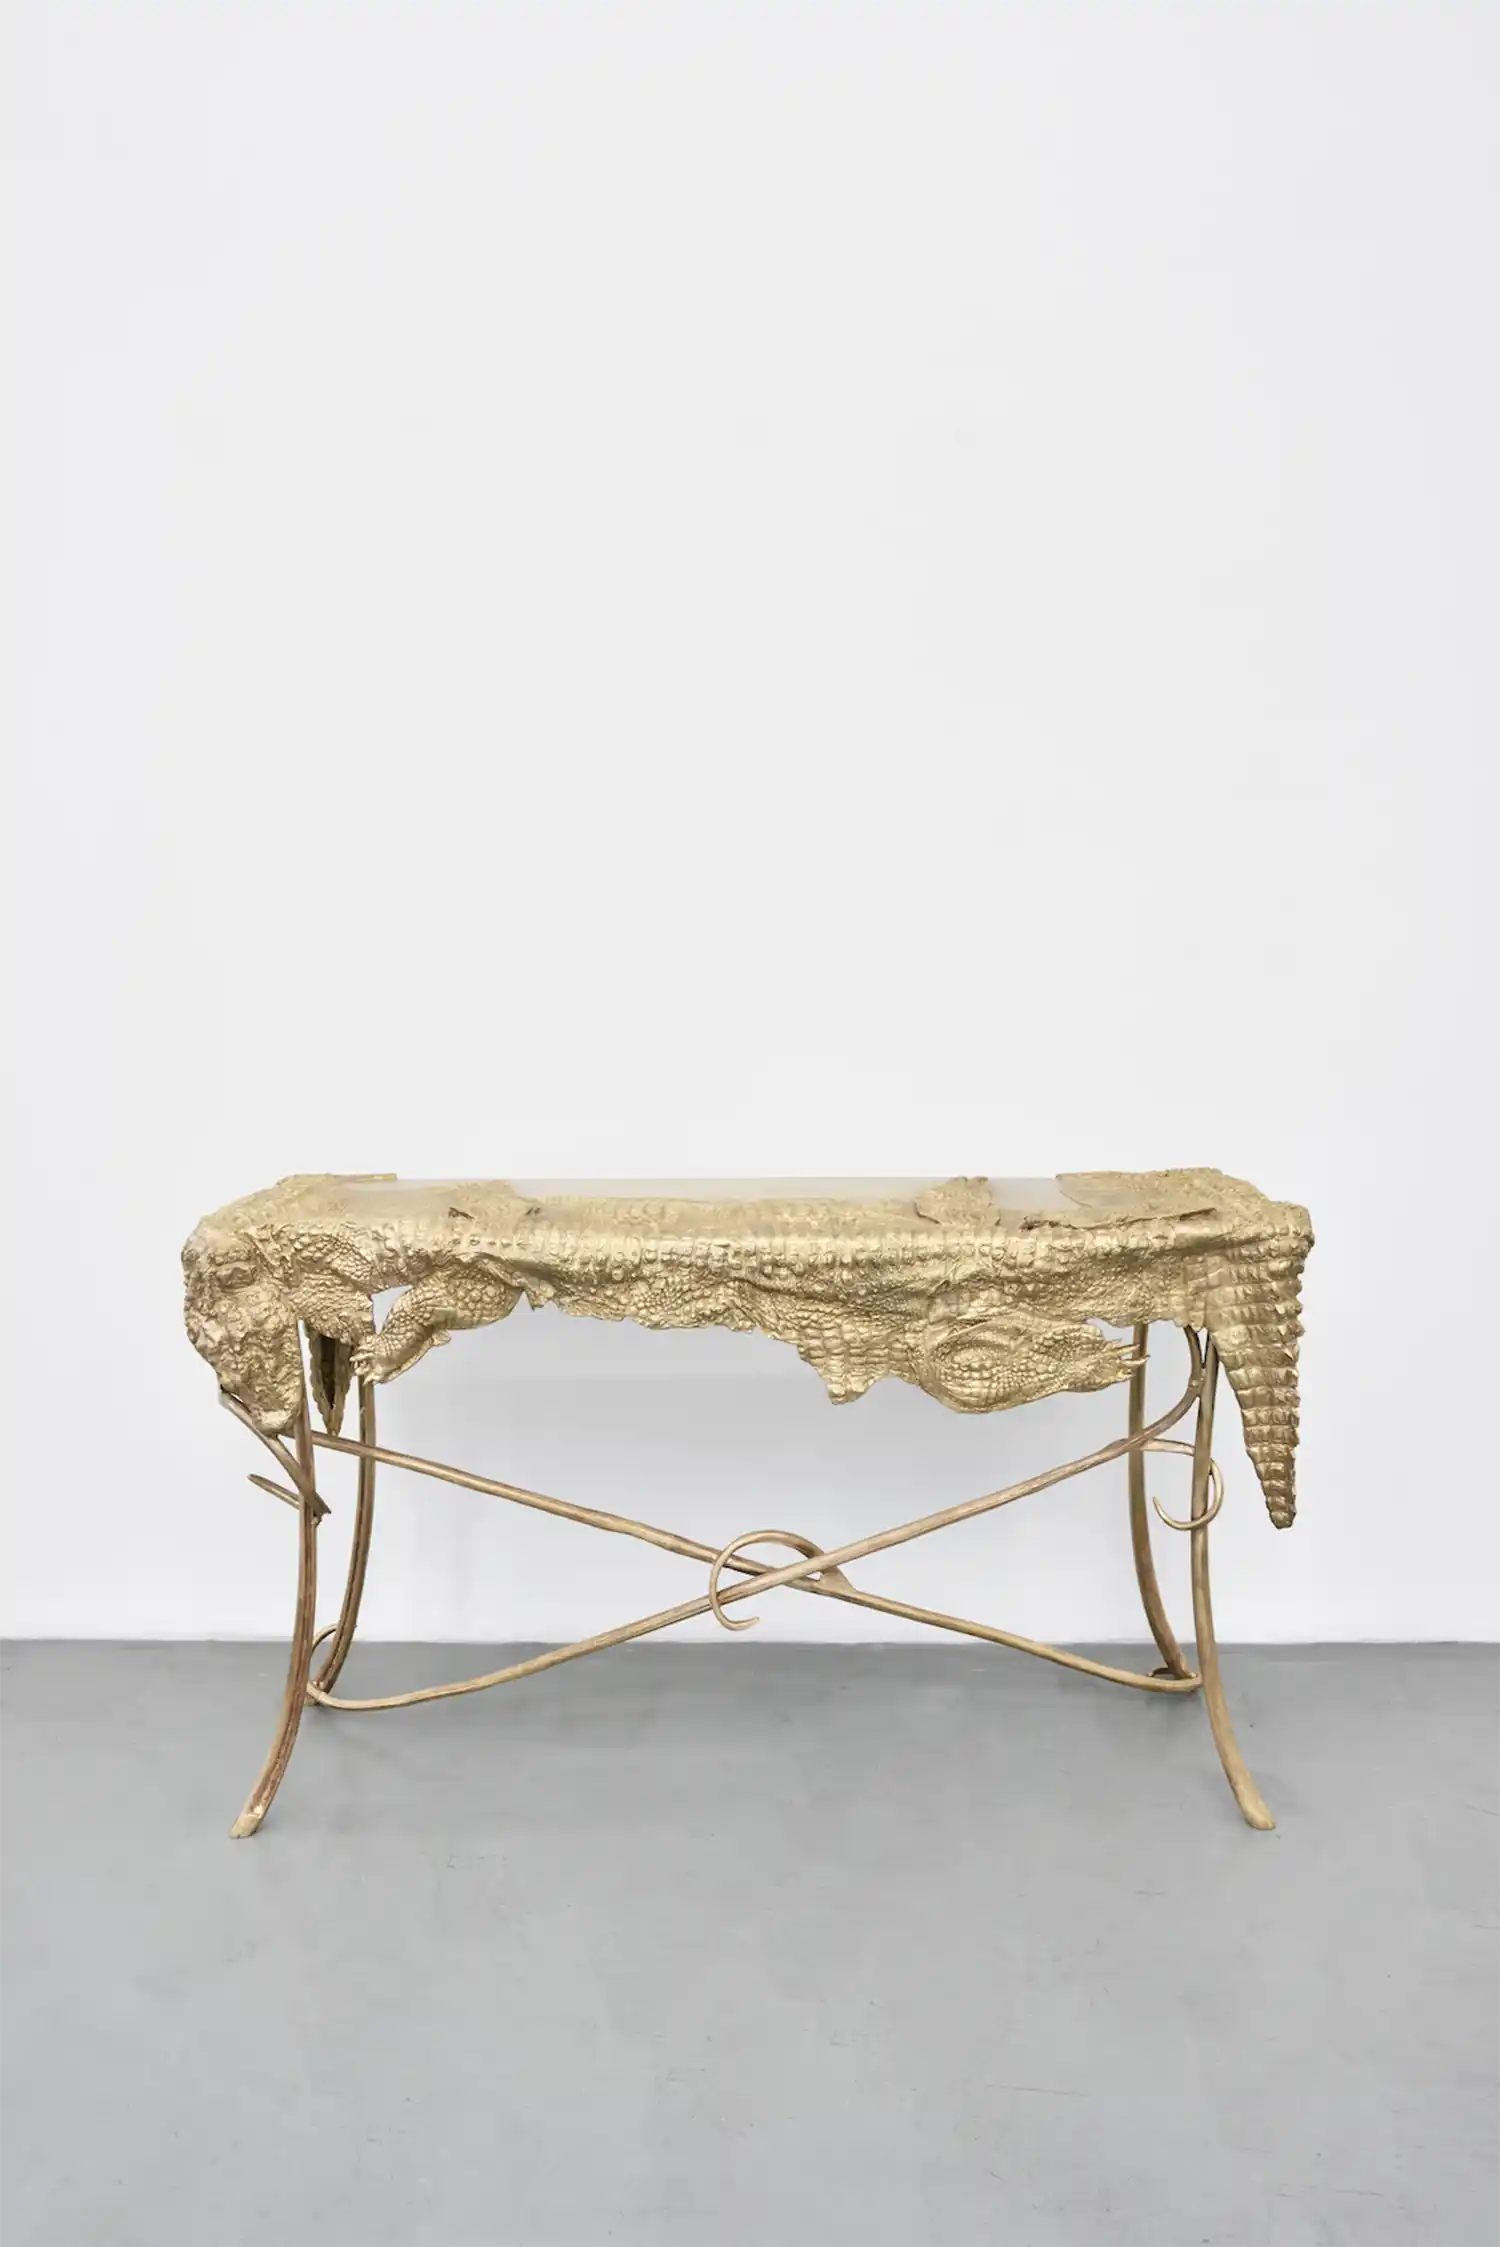 Bureau Crocodile 2007 2015 by Claude Lalanne at Galerie Mitterrand. Image courtesy of Galerie Mitterrand1 1